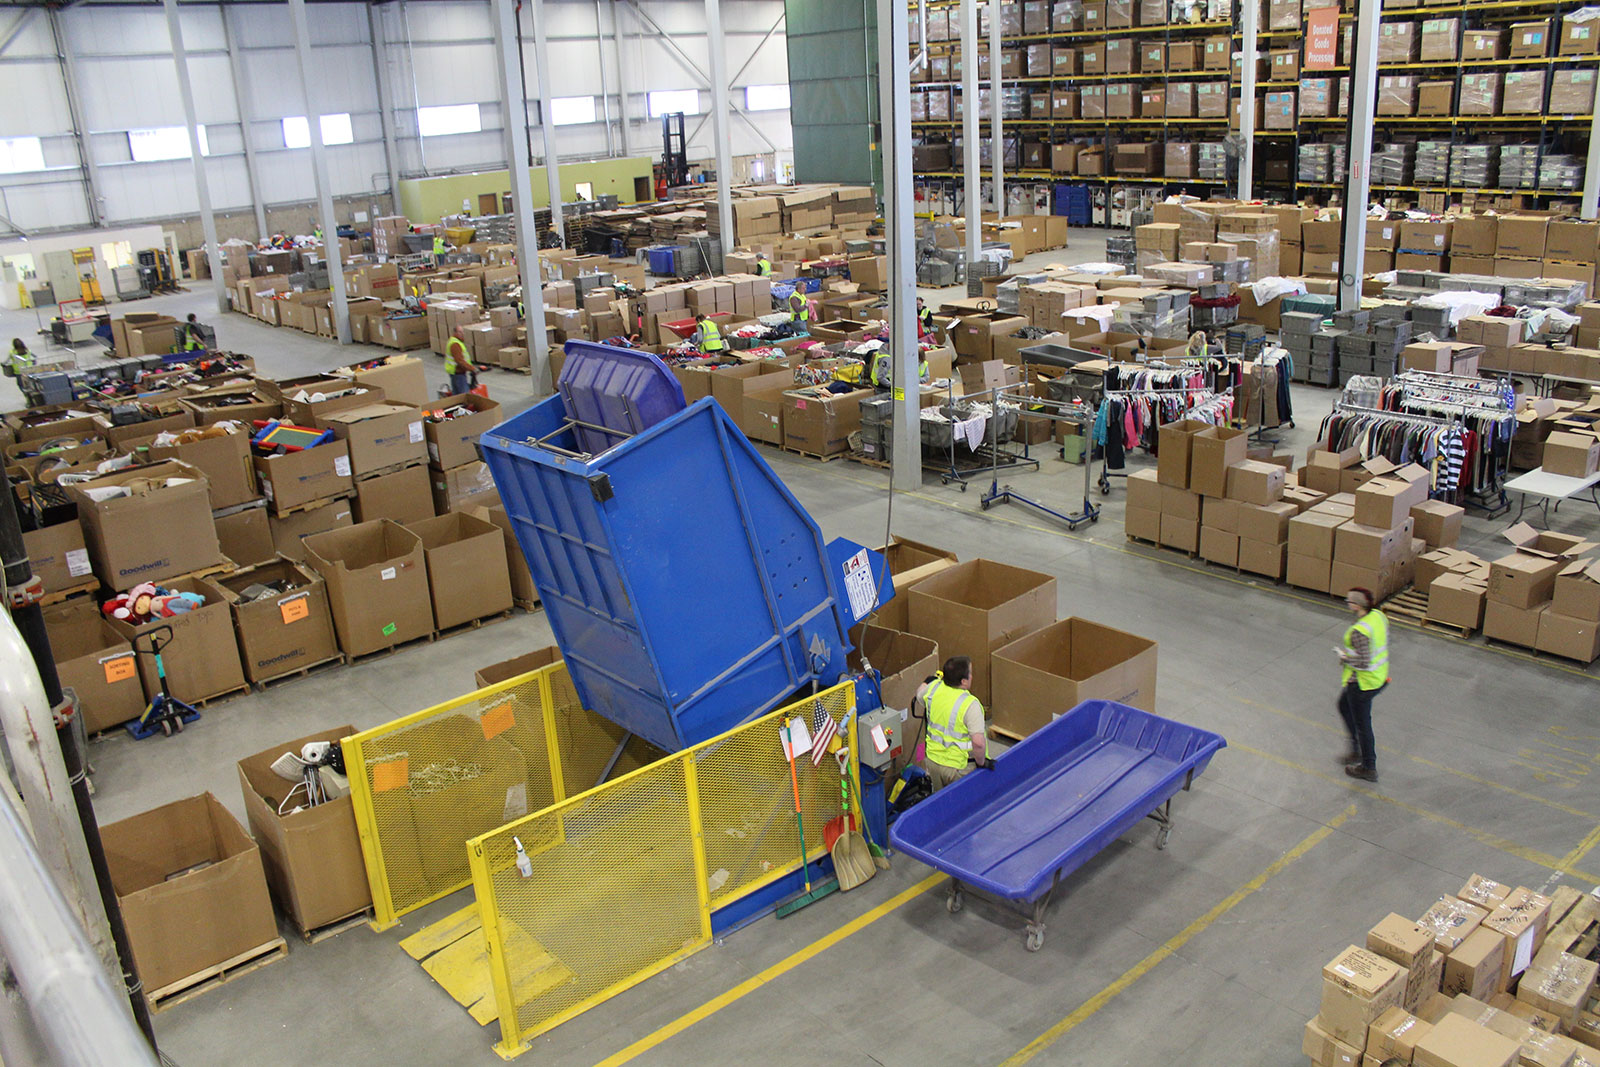 Goodwill Begins Tours of Gorham, ME Warehouse on June 11